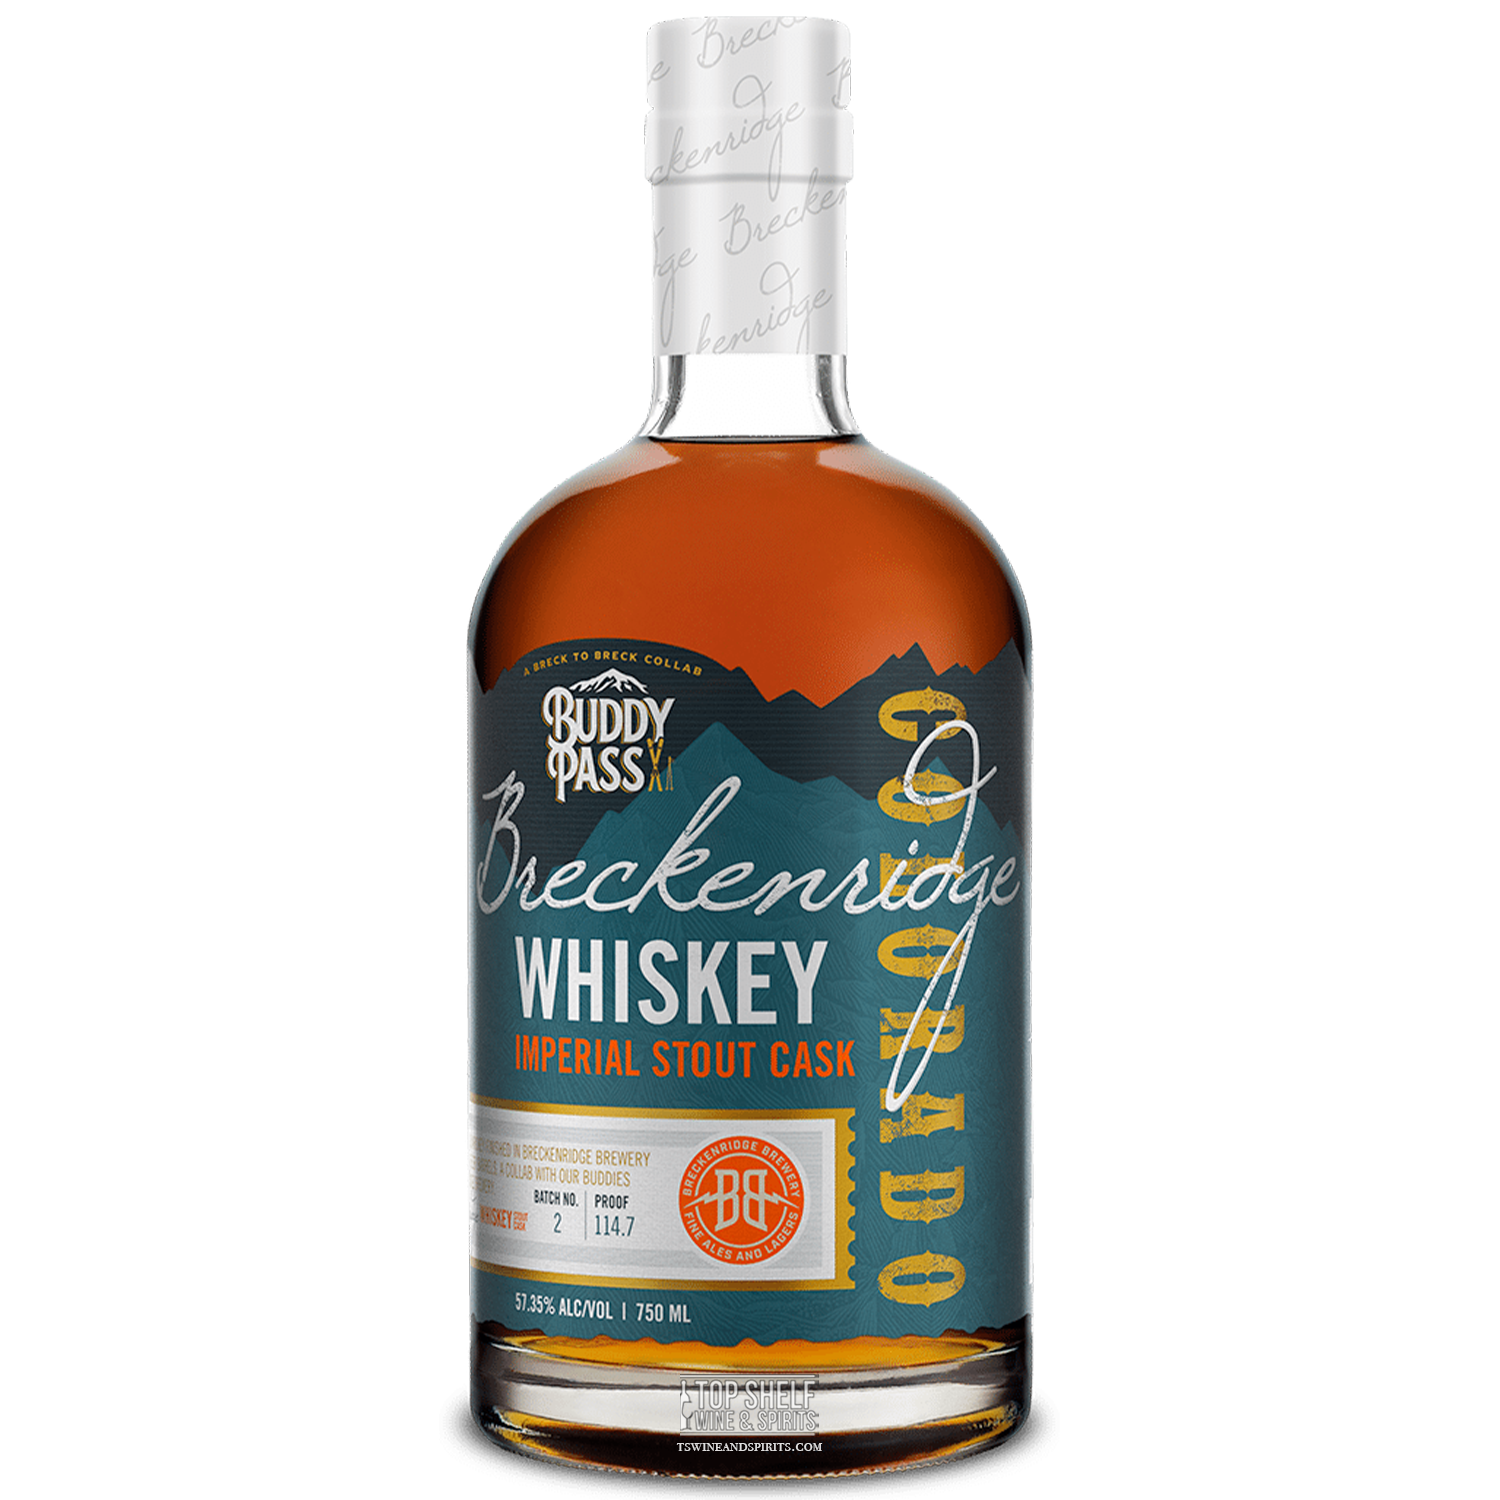 Breckenridge Buddy Pass Imperial Stout Cask Whiskey